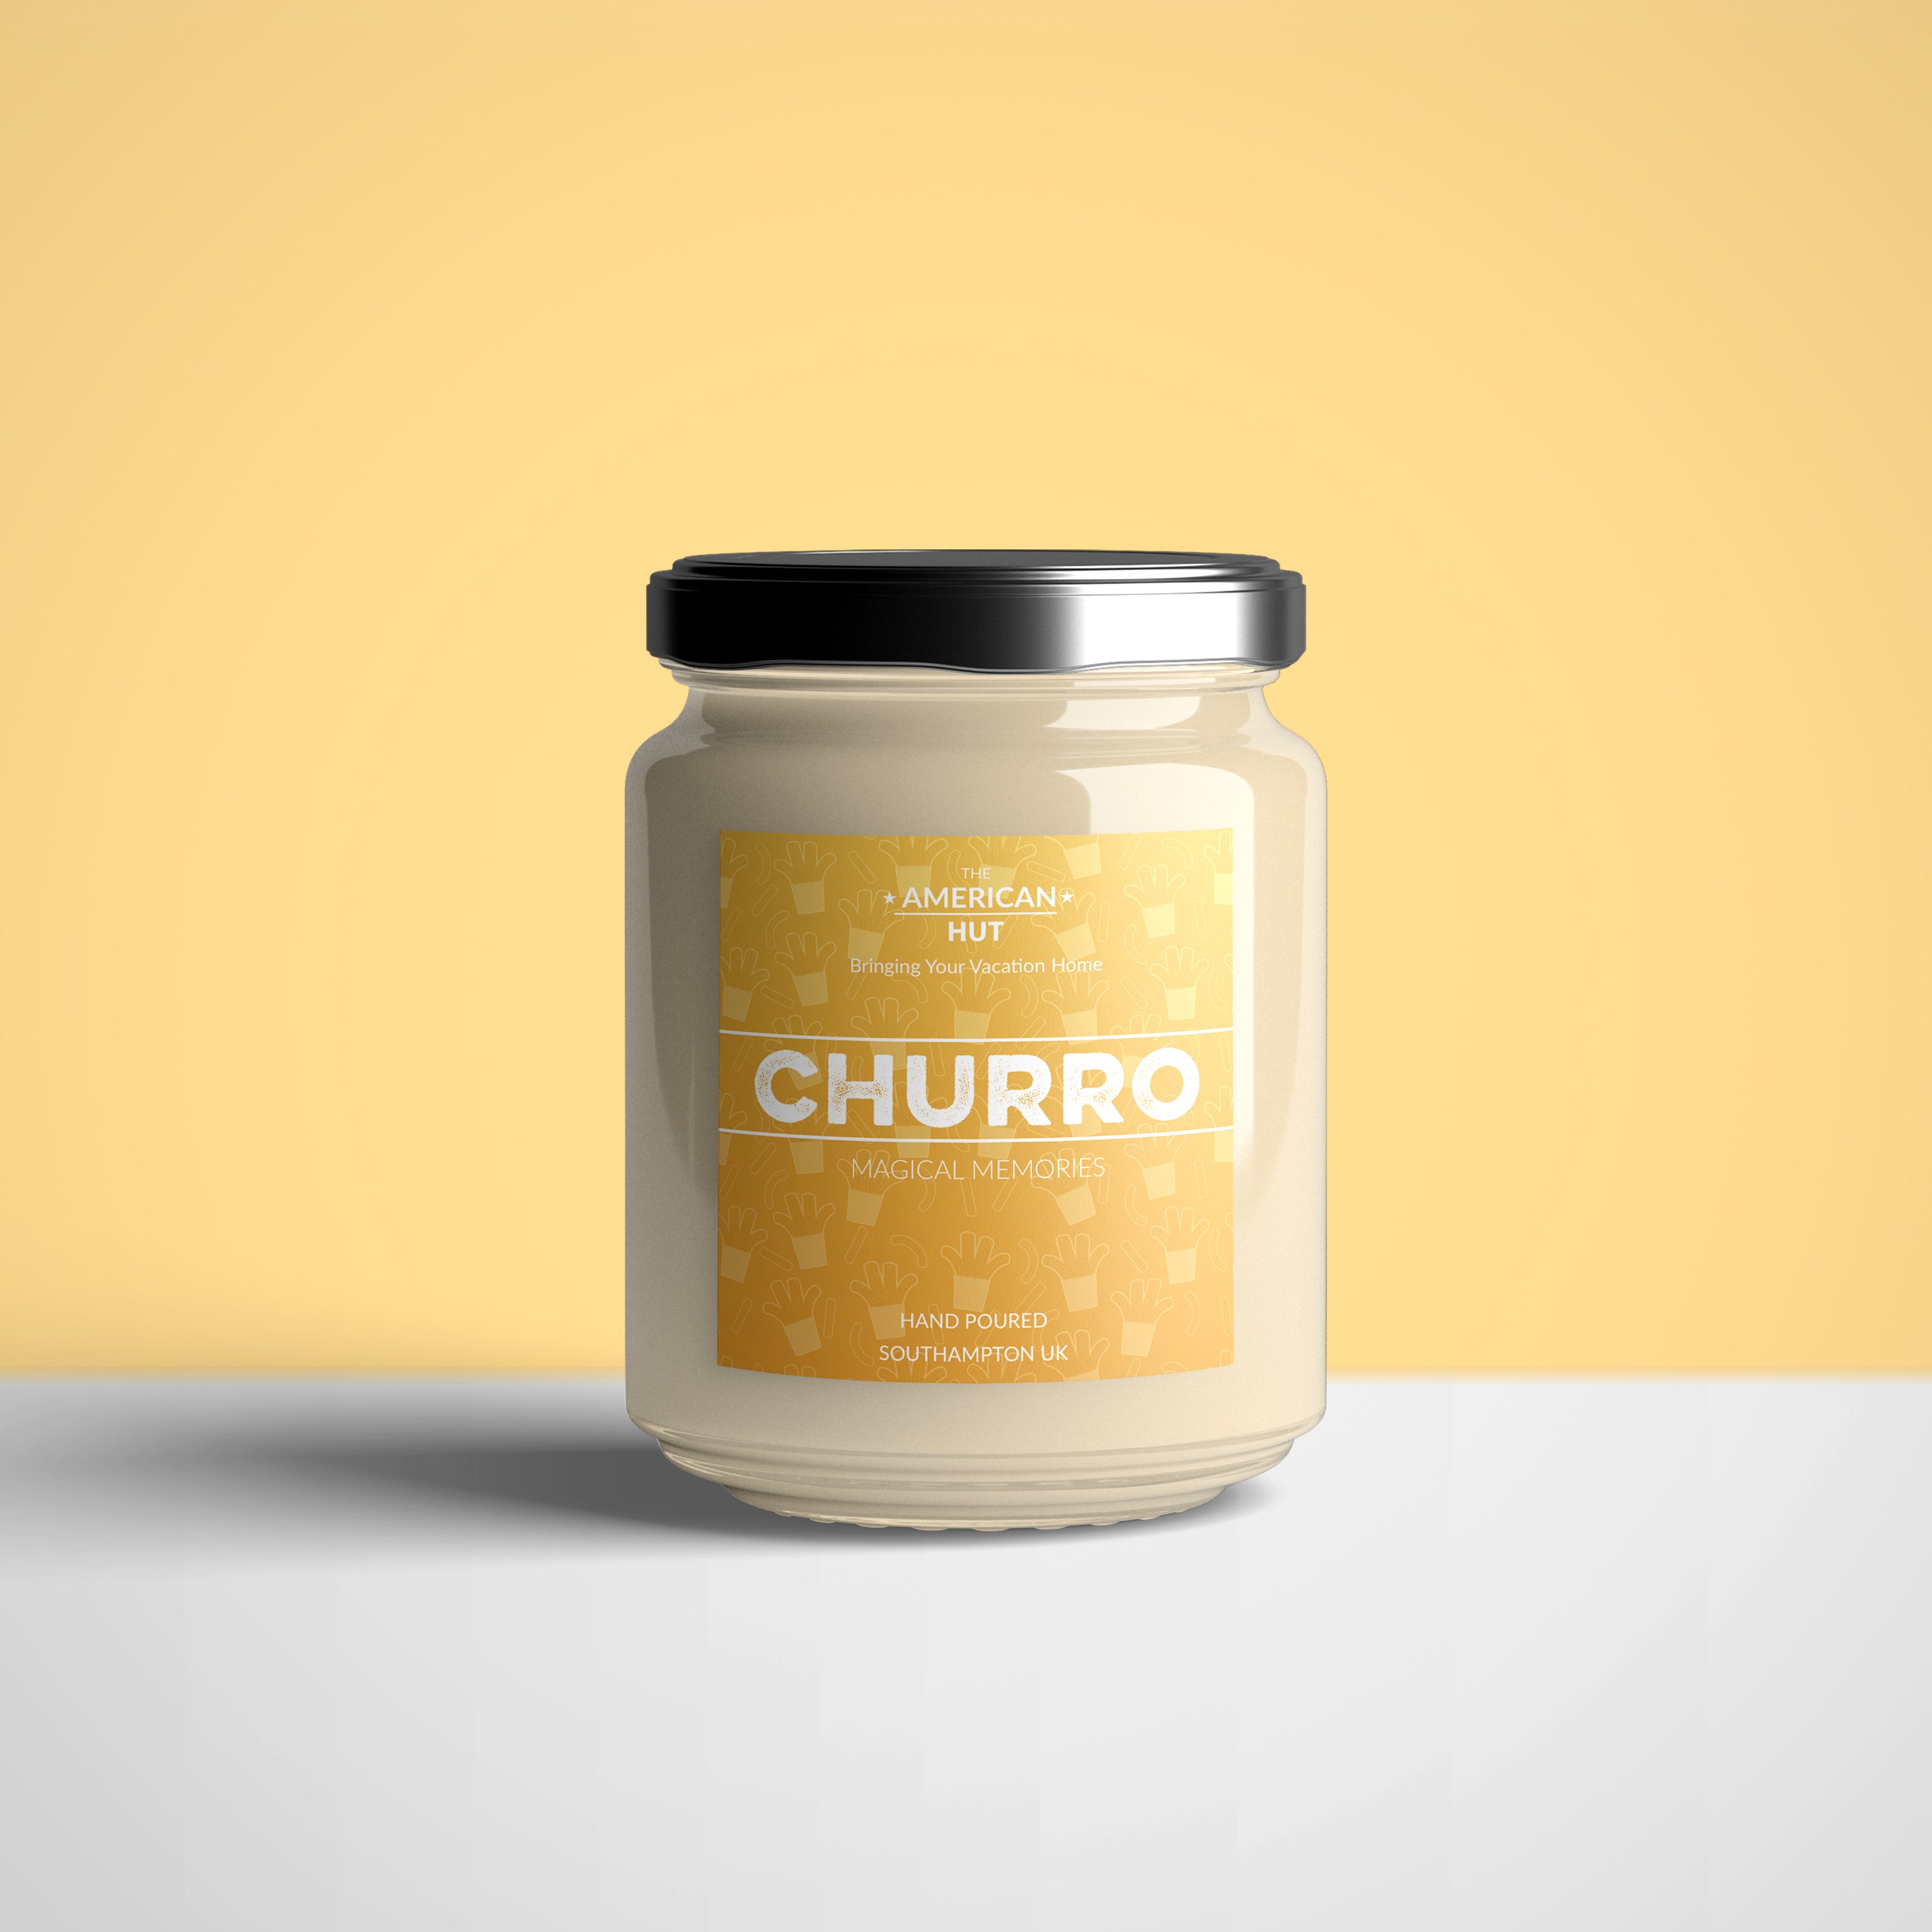 Churro 8oz Candle, cream wax, Jam Jar Candle with silver lid